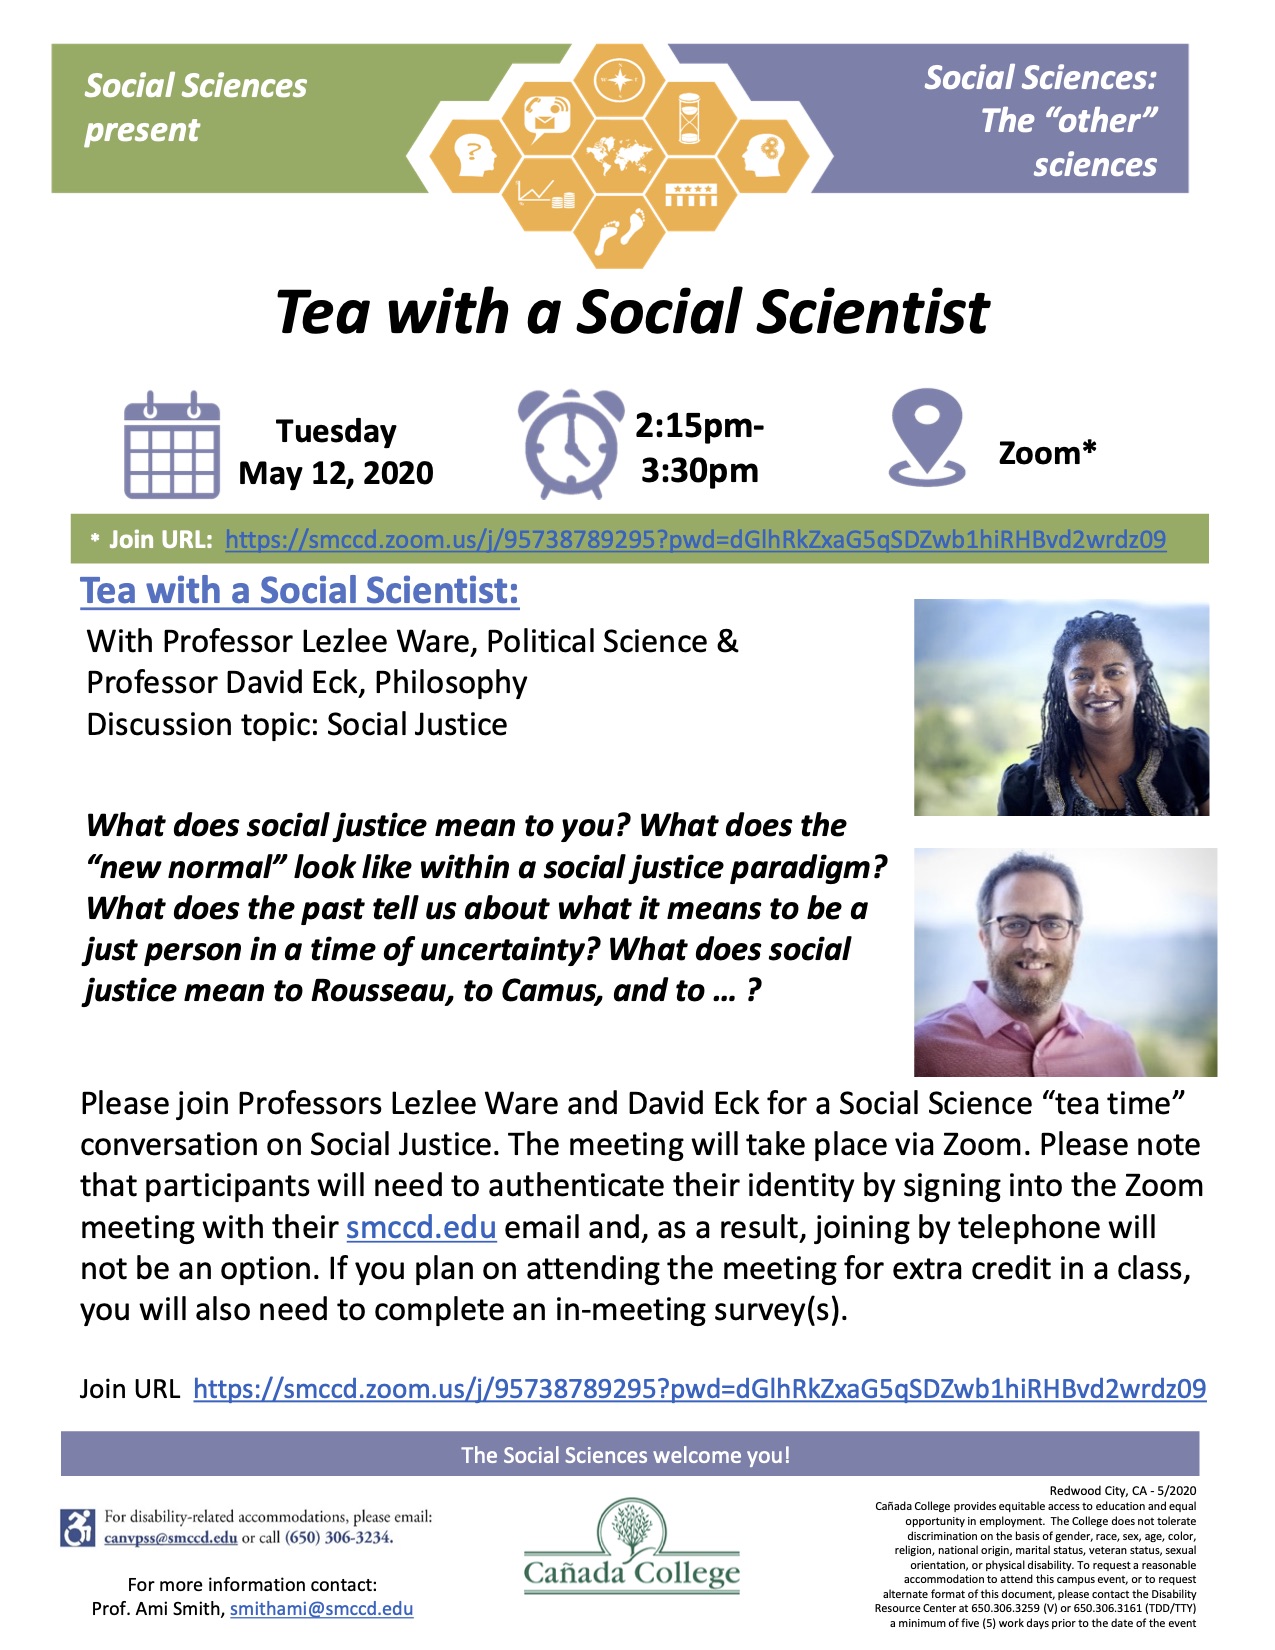 Tea with a Social Scientist Flyer, Tuesday May 12 2020, 2:15pm-3:30pm on Zoom